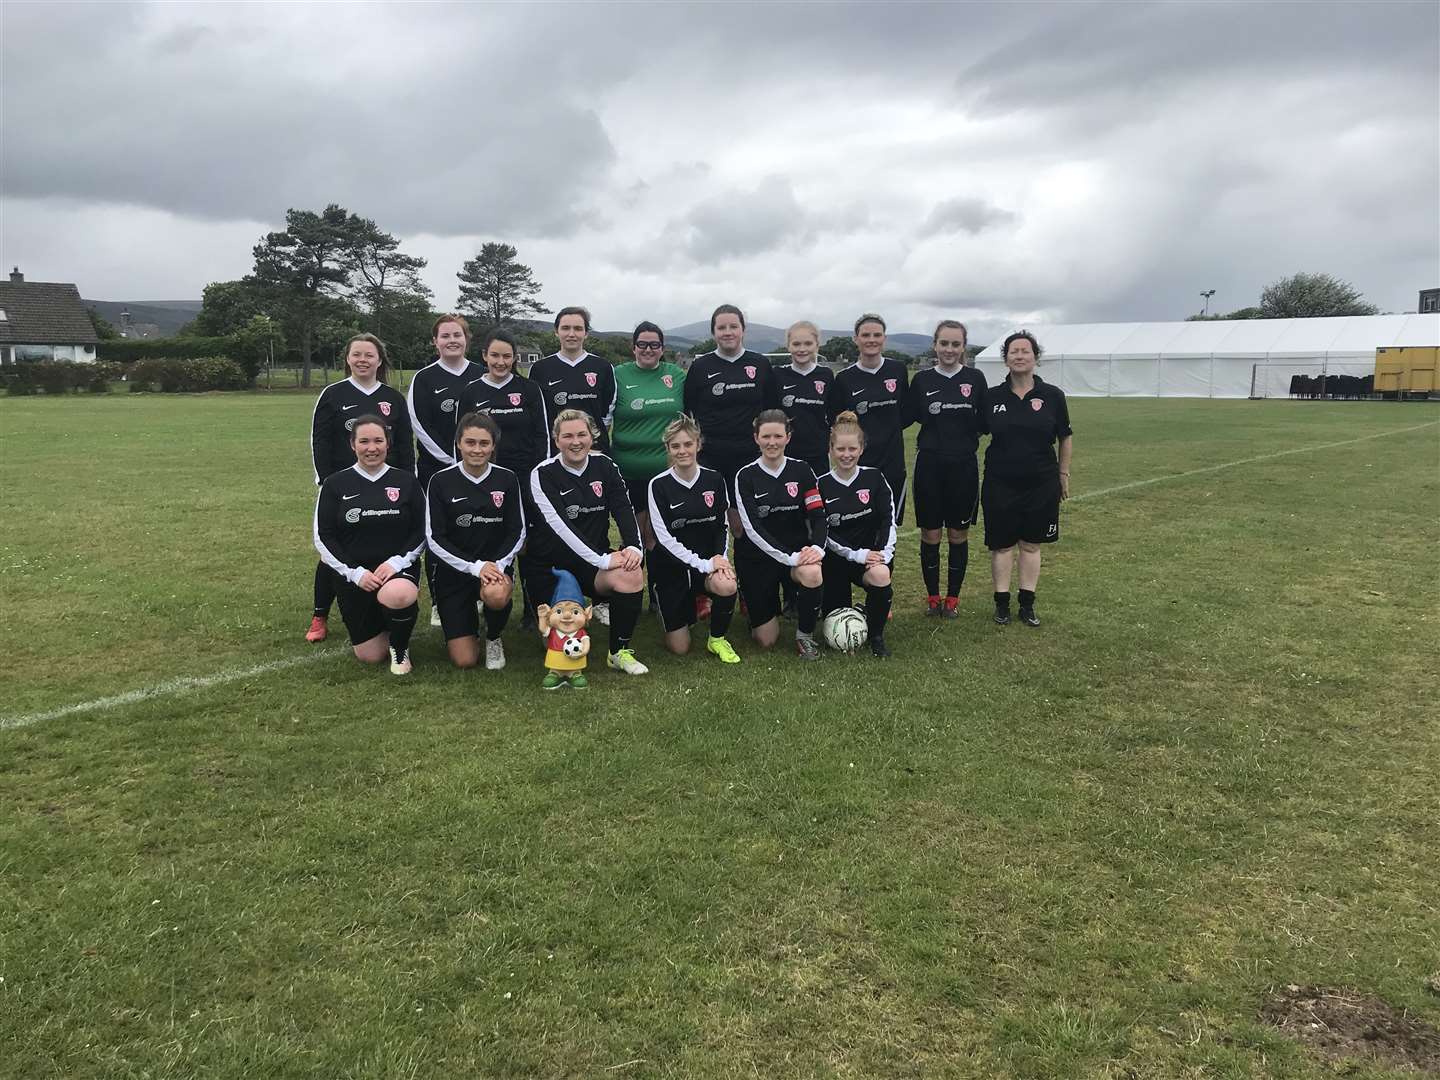 Caithness Ladies continued their fine start to the season with a 1-0 win at Brora.